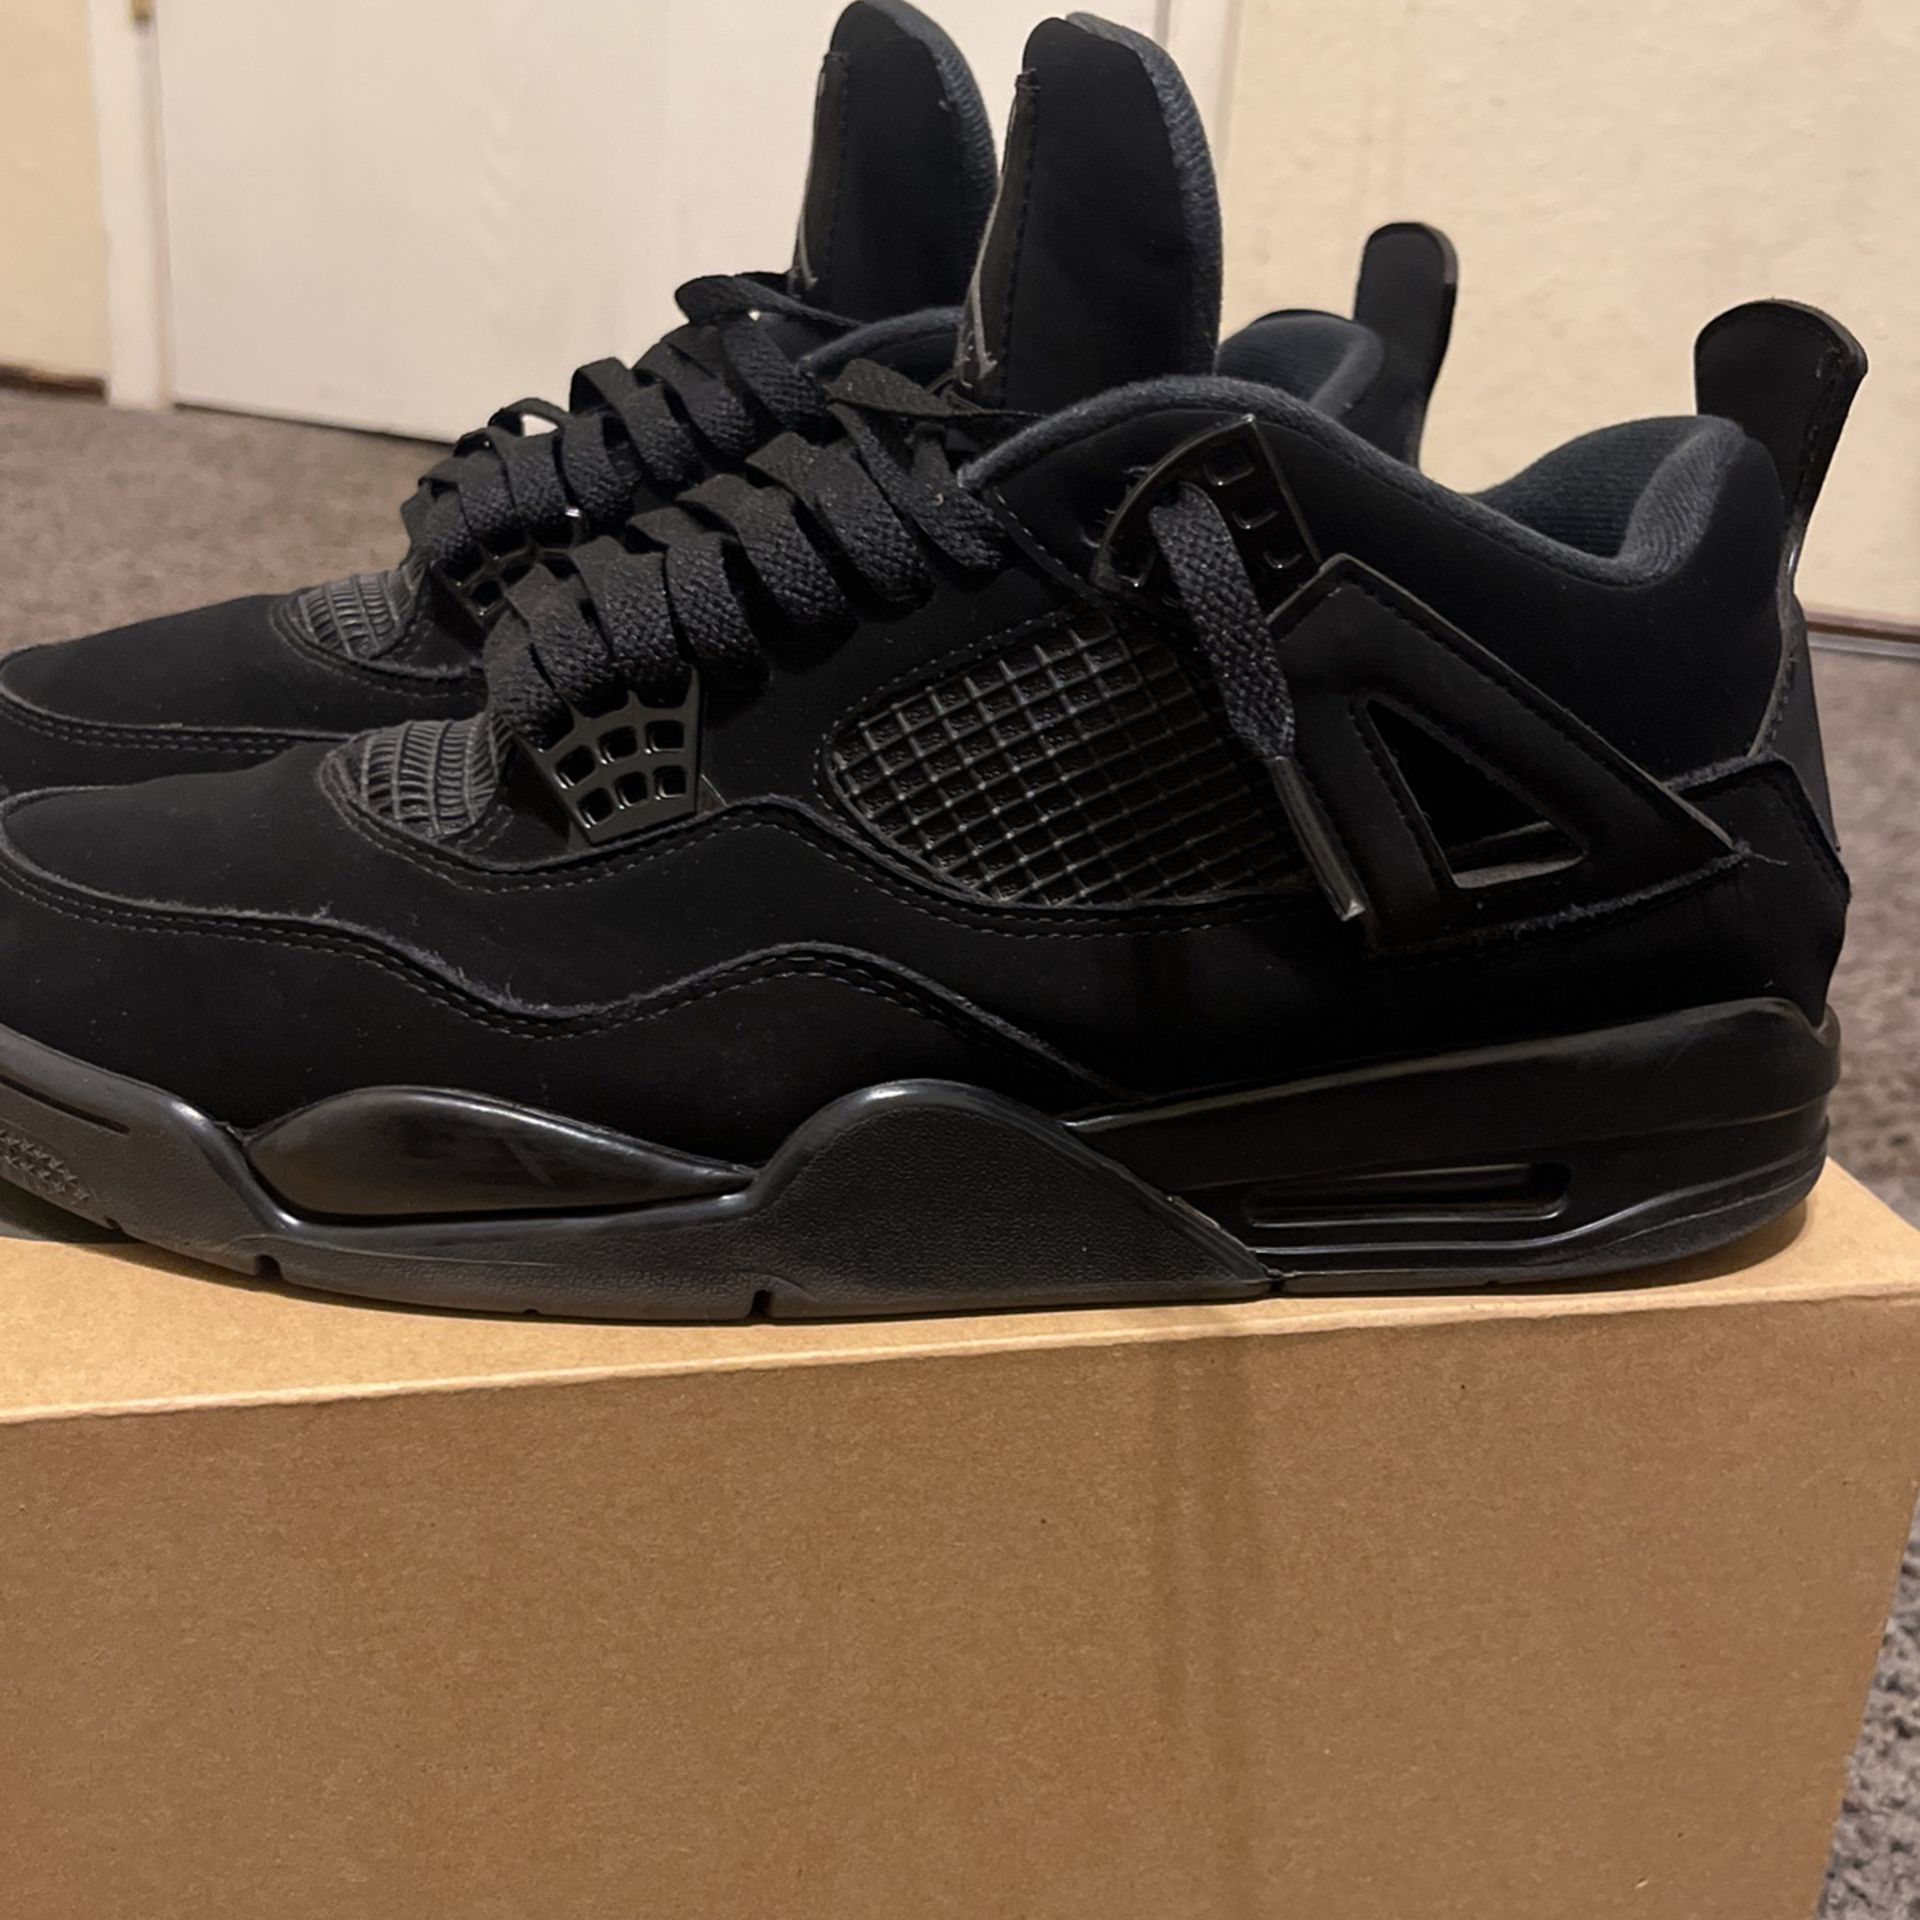 Restored Black Cat 4s Size 11 for Sale in Ceres, CA - OfferUp